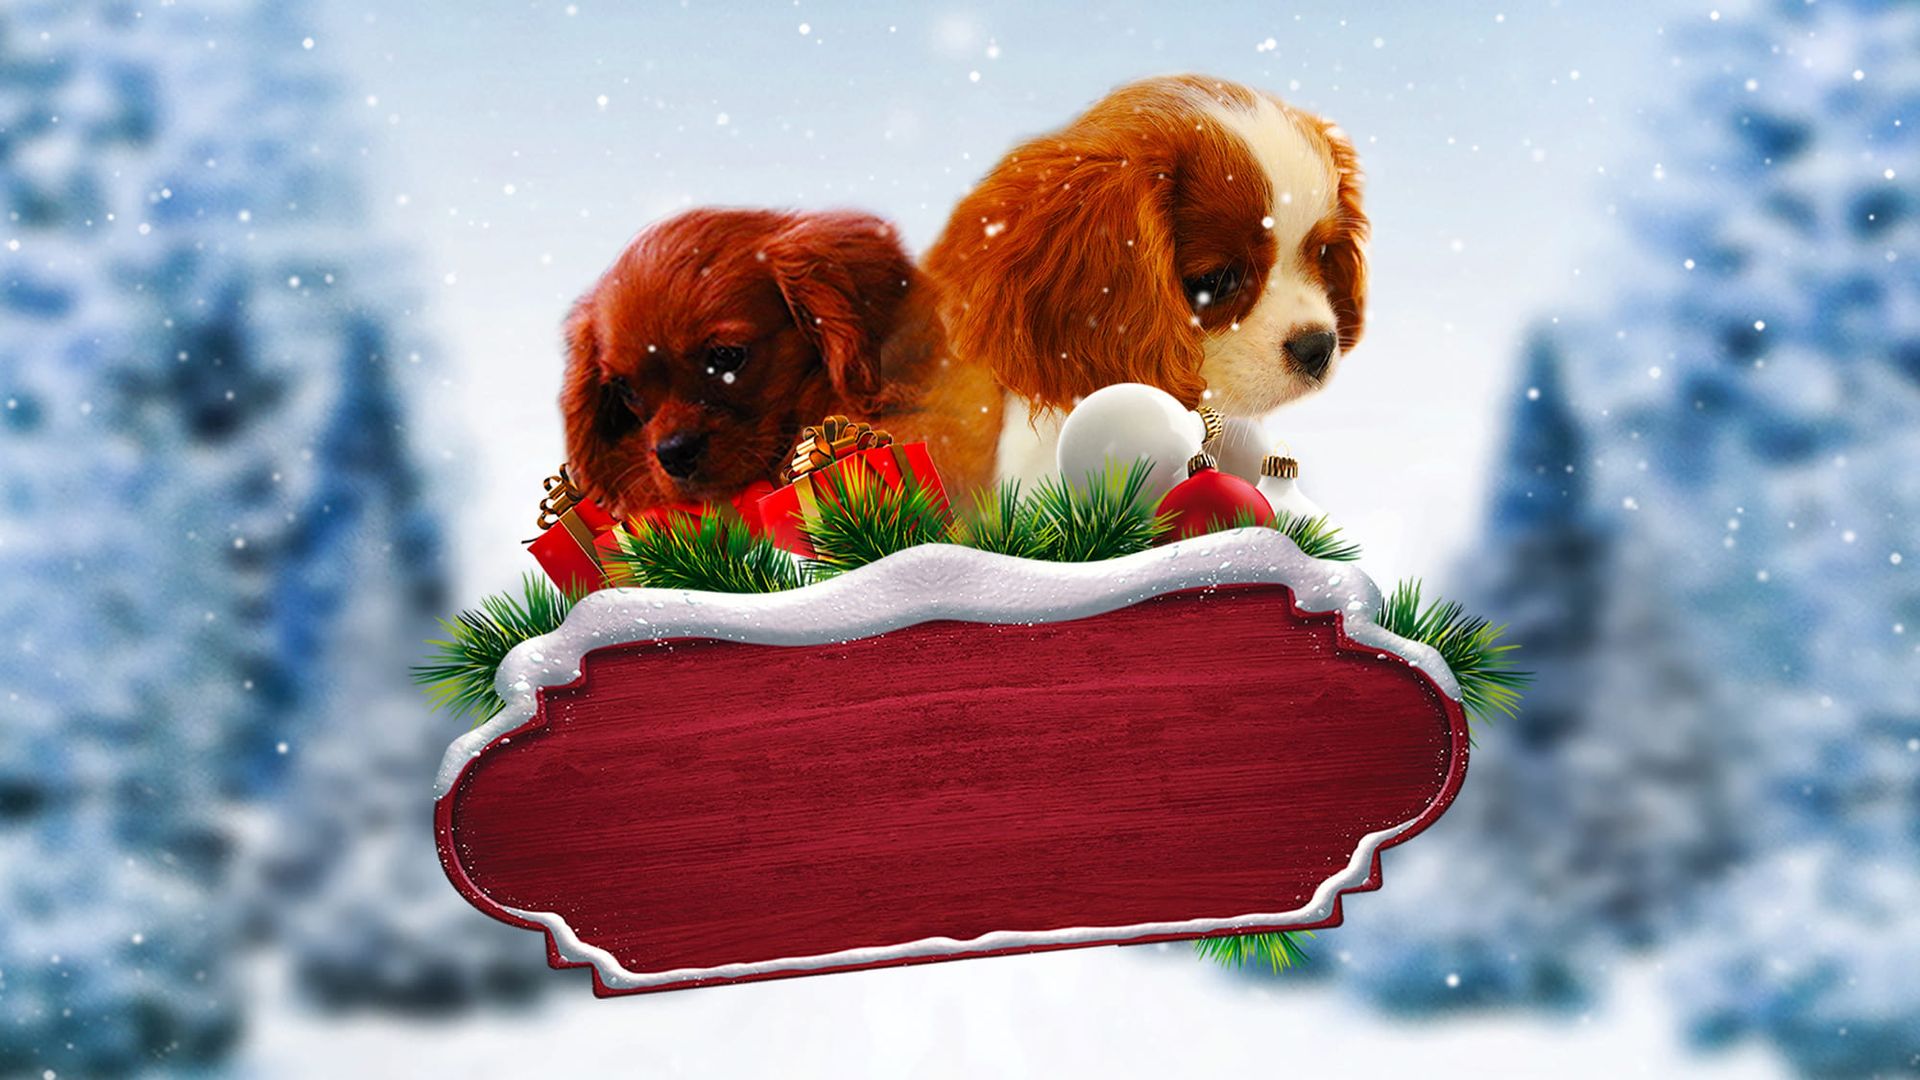 Project: Puppies for Christmas background